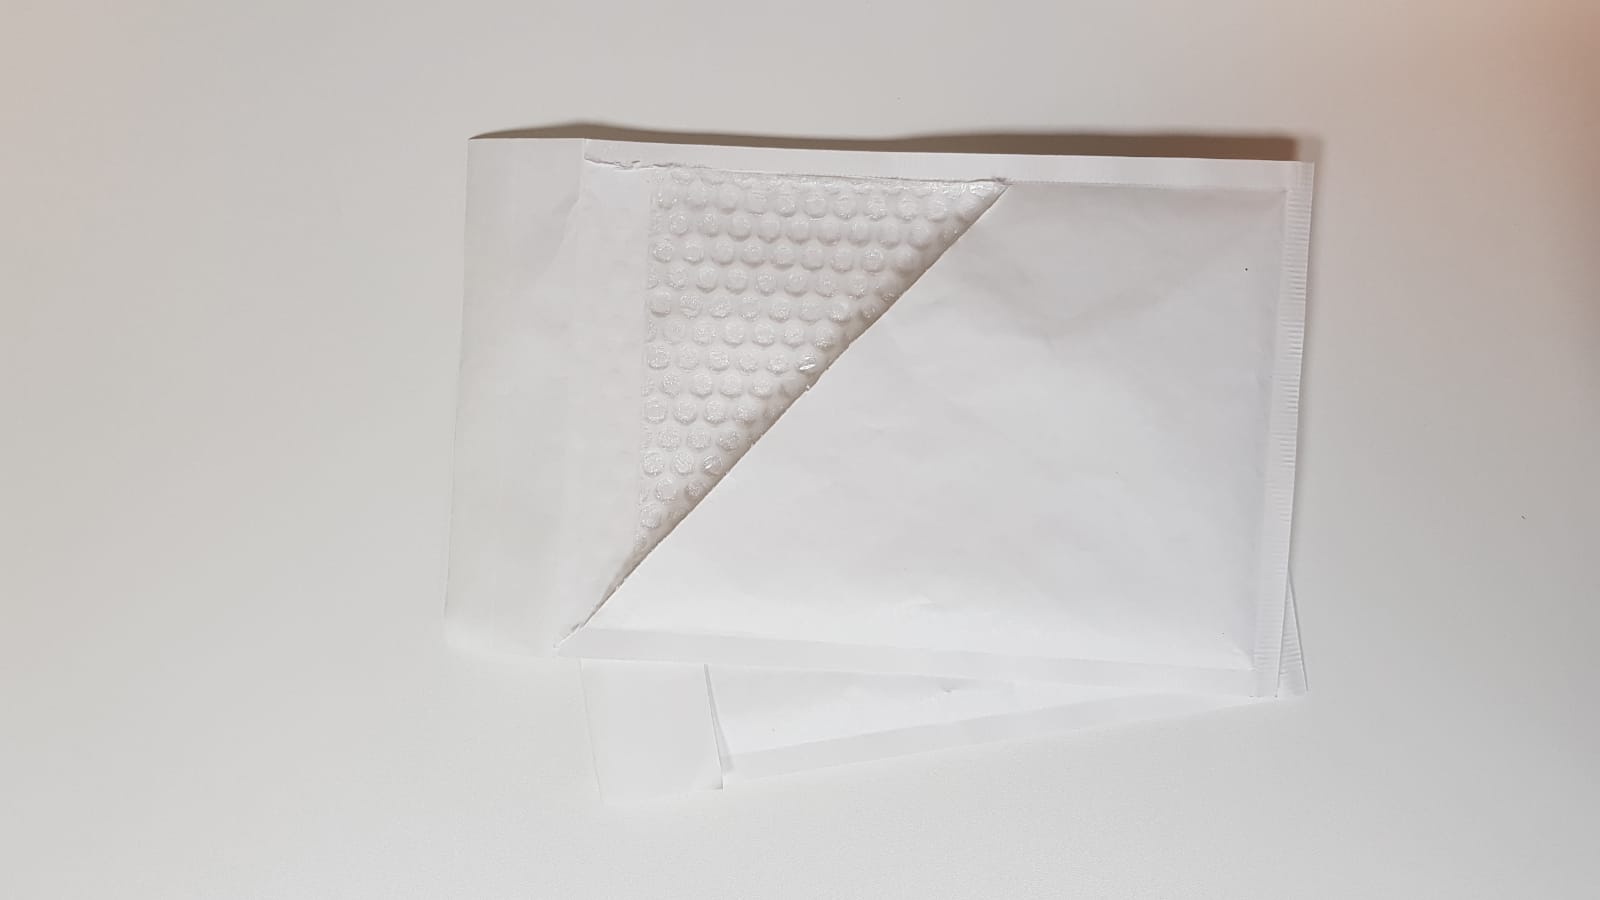 Padded bag 220 X 330 (and various sizes) - Airship White Peel & Seal Padded Bags